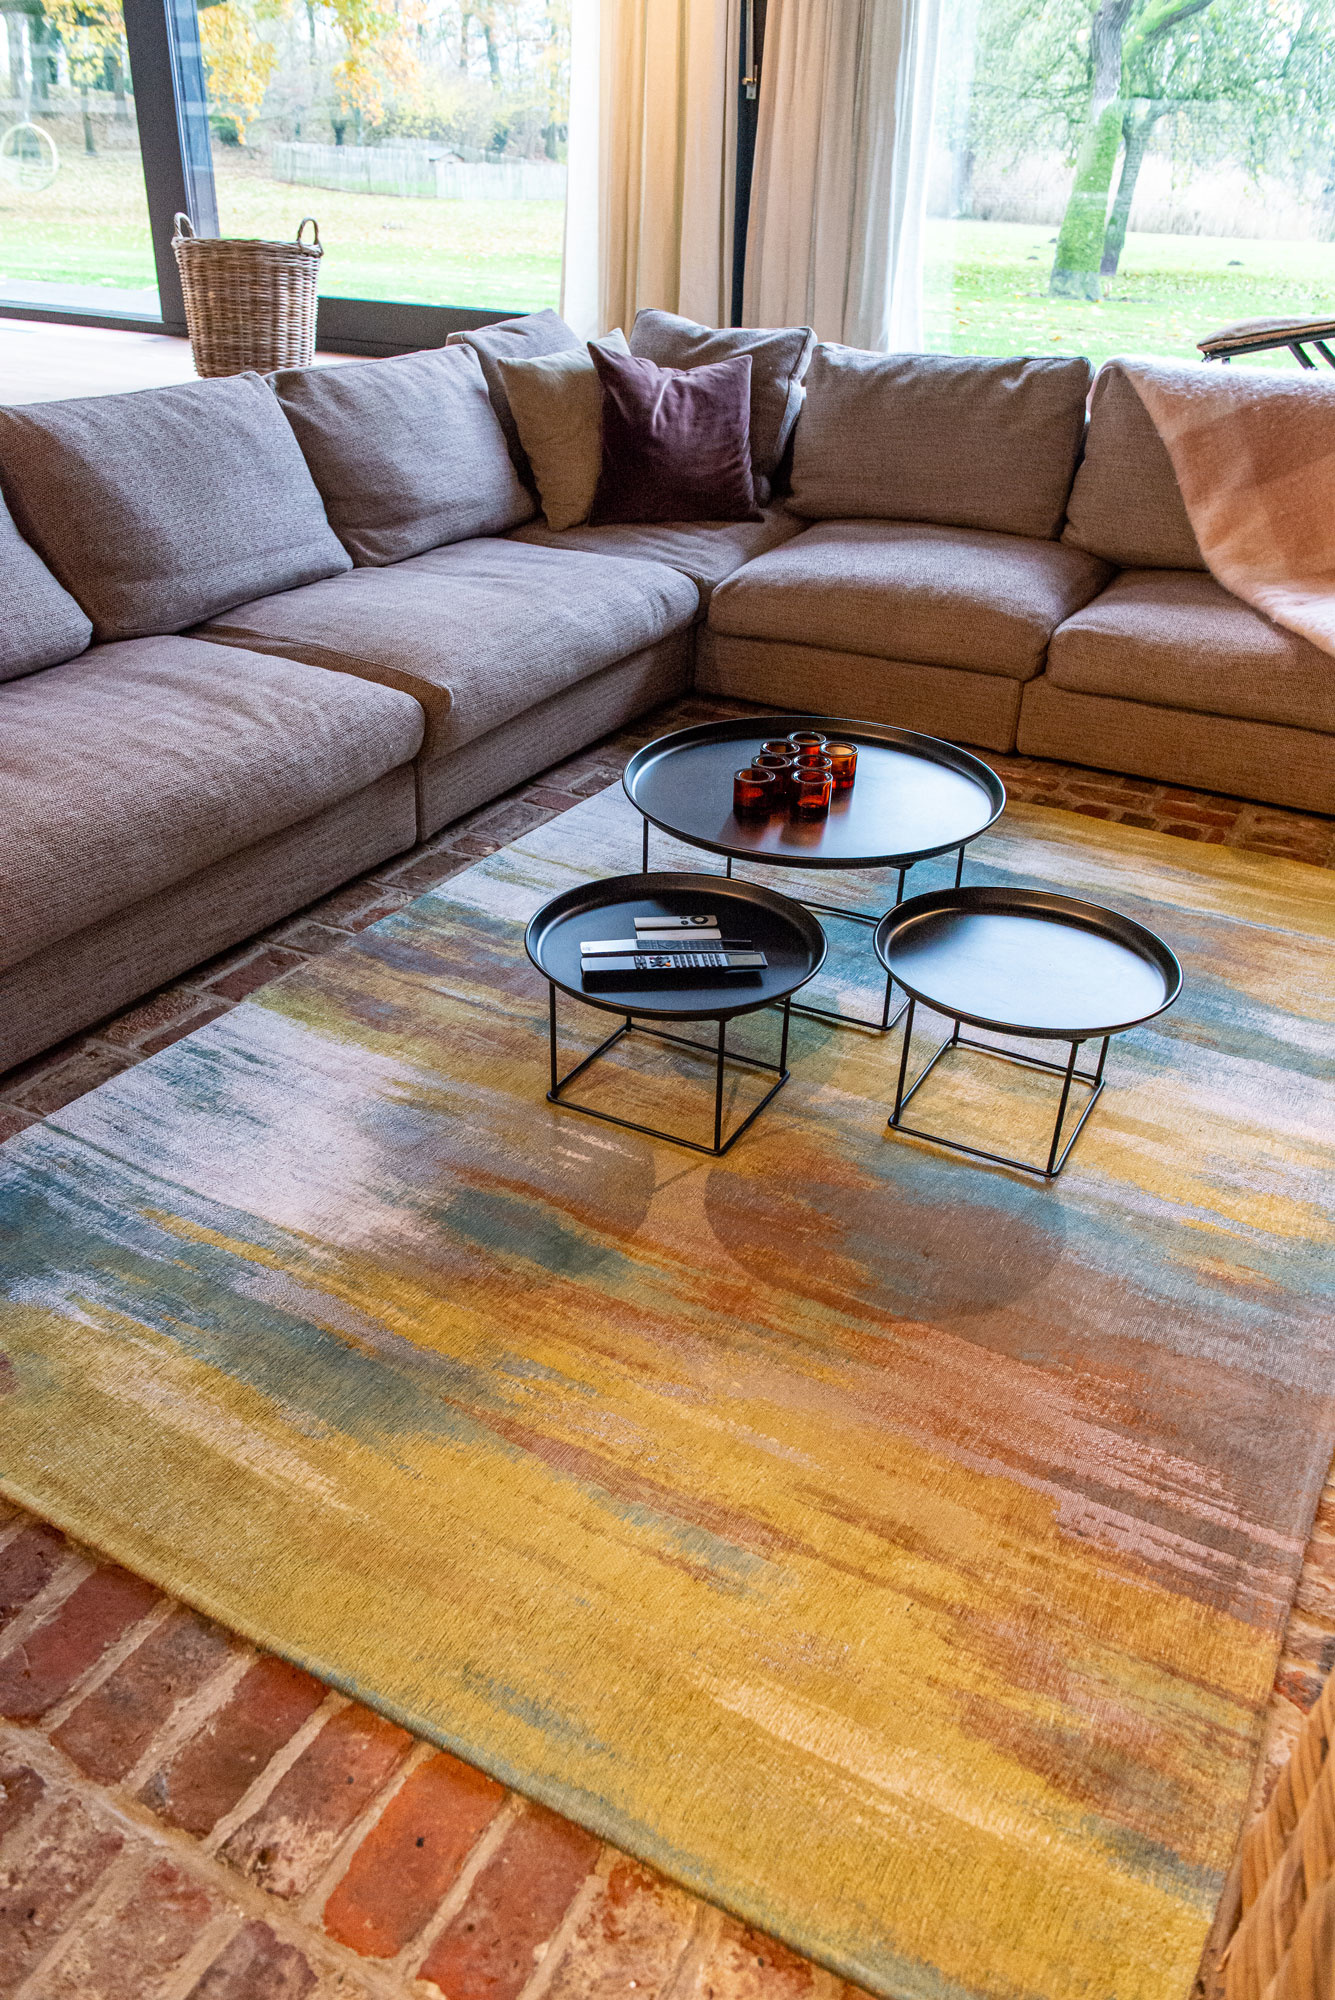 Abstract Flatwoven Bronze Rug ☞ Size: 7' 7" x 11' (230 x 330 cm)